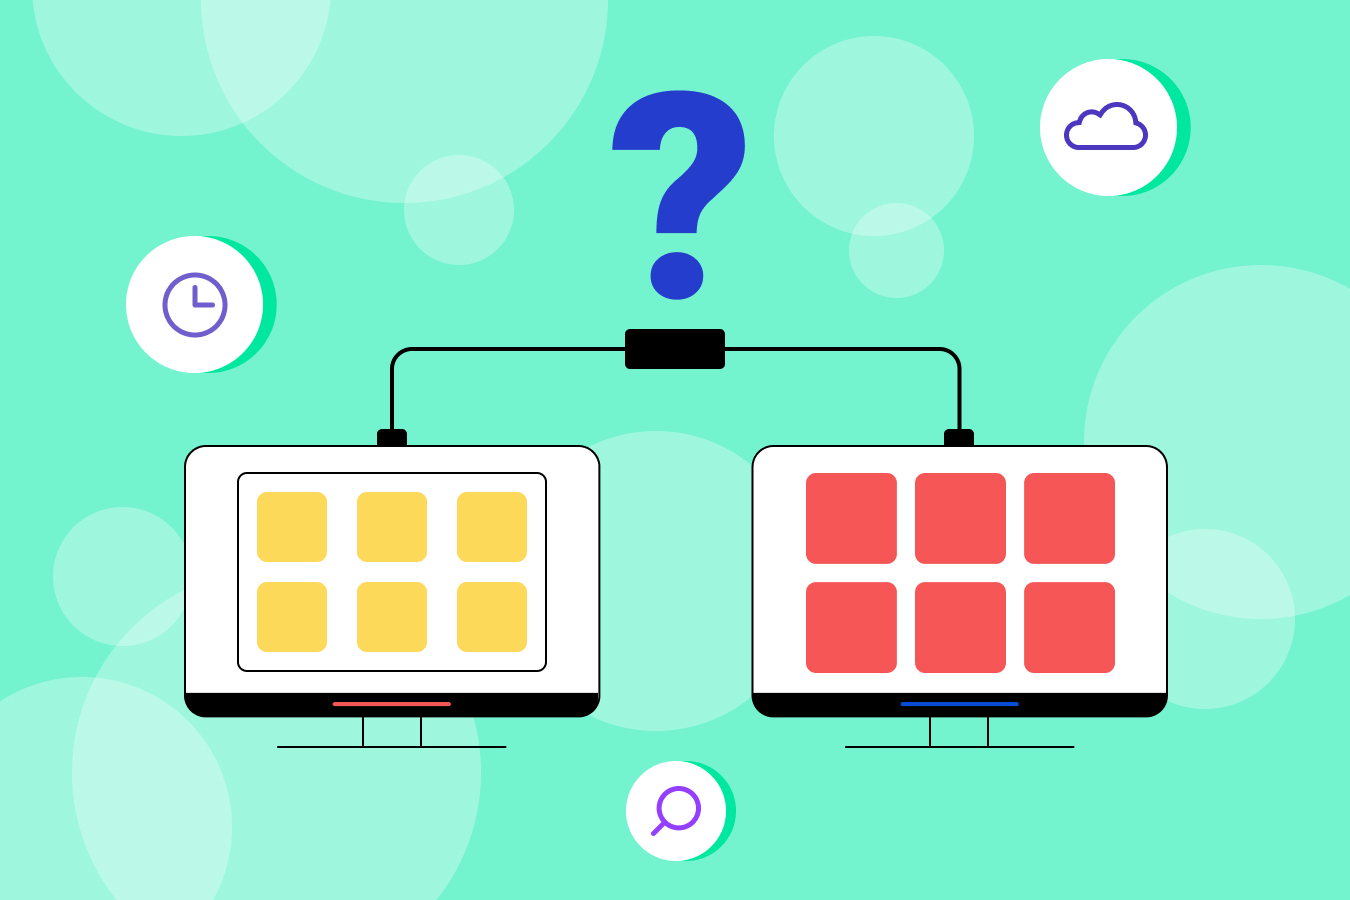 Monolith vs Microservices: Which Is Better to Choose?